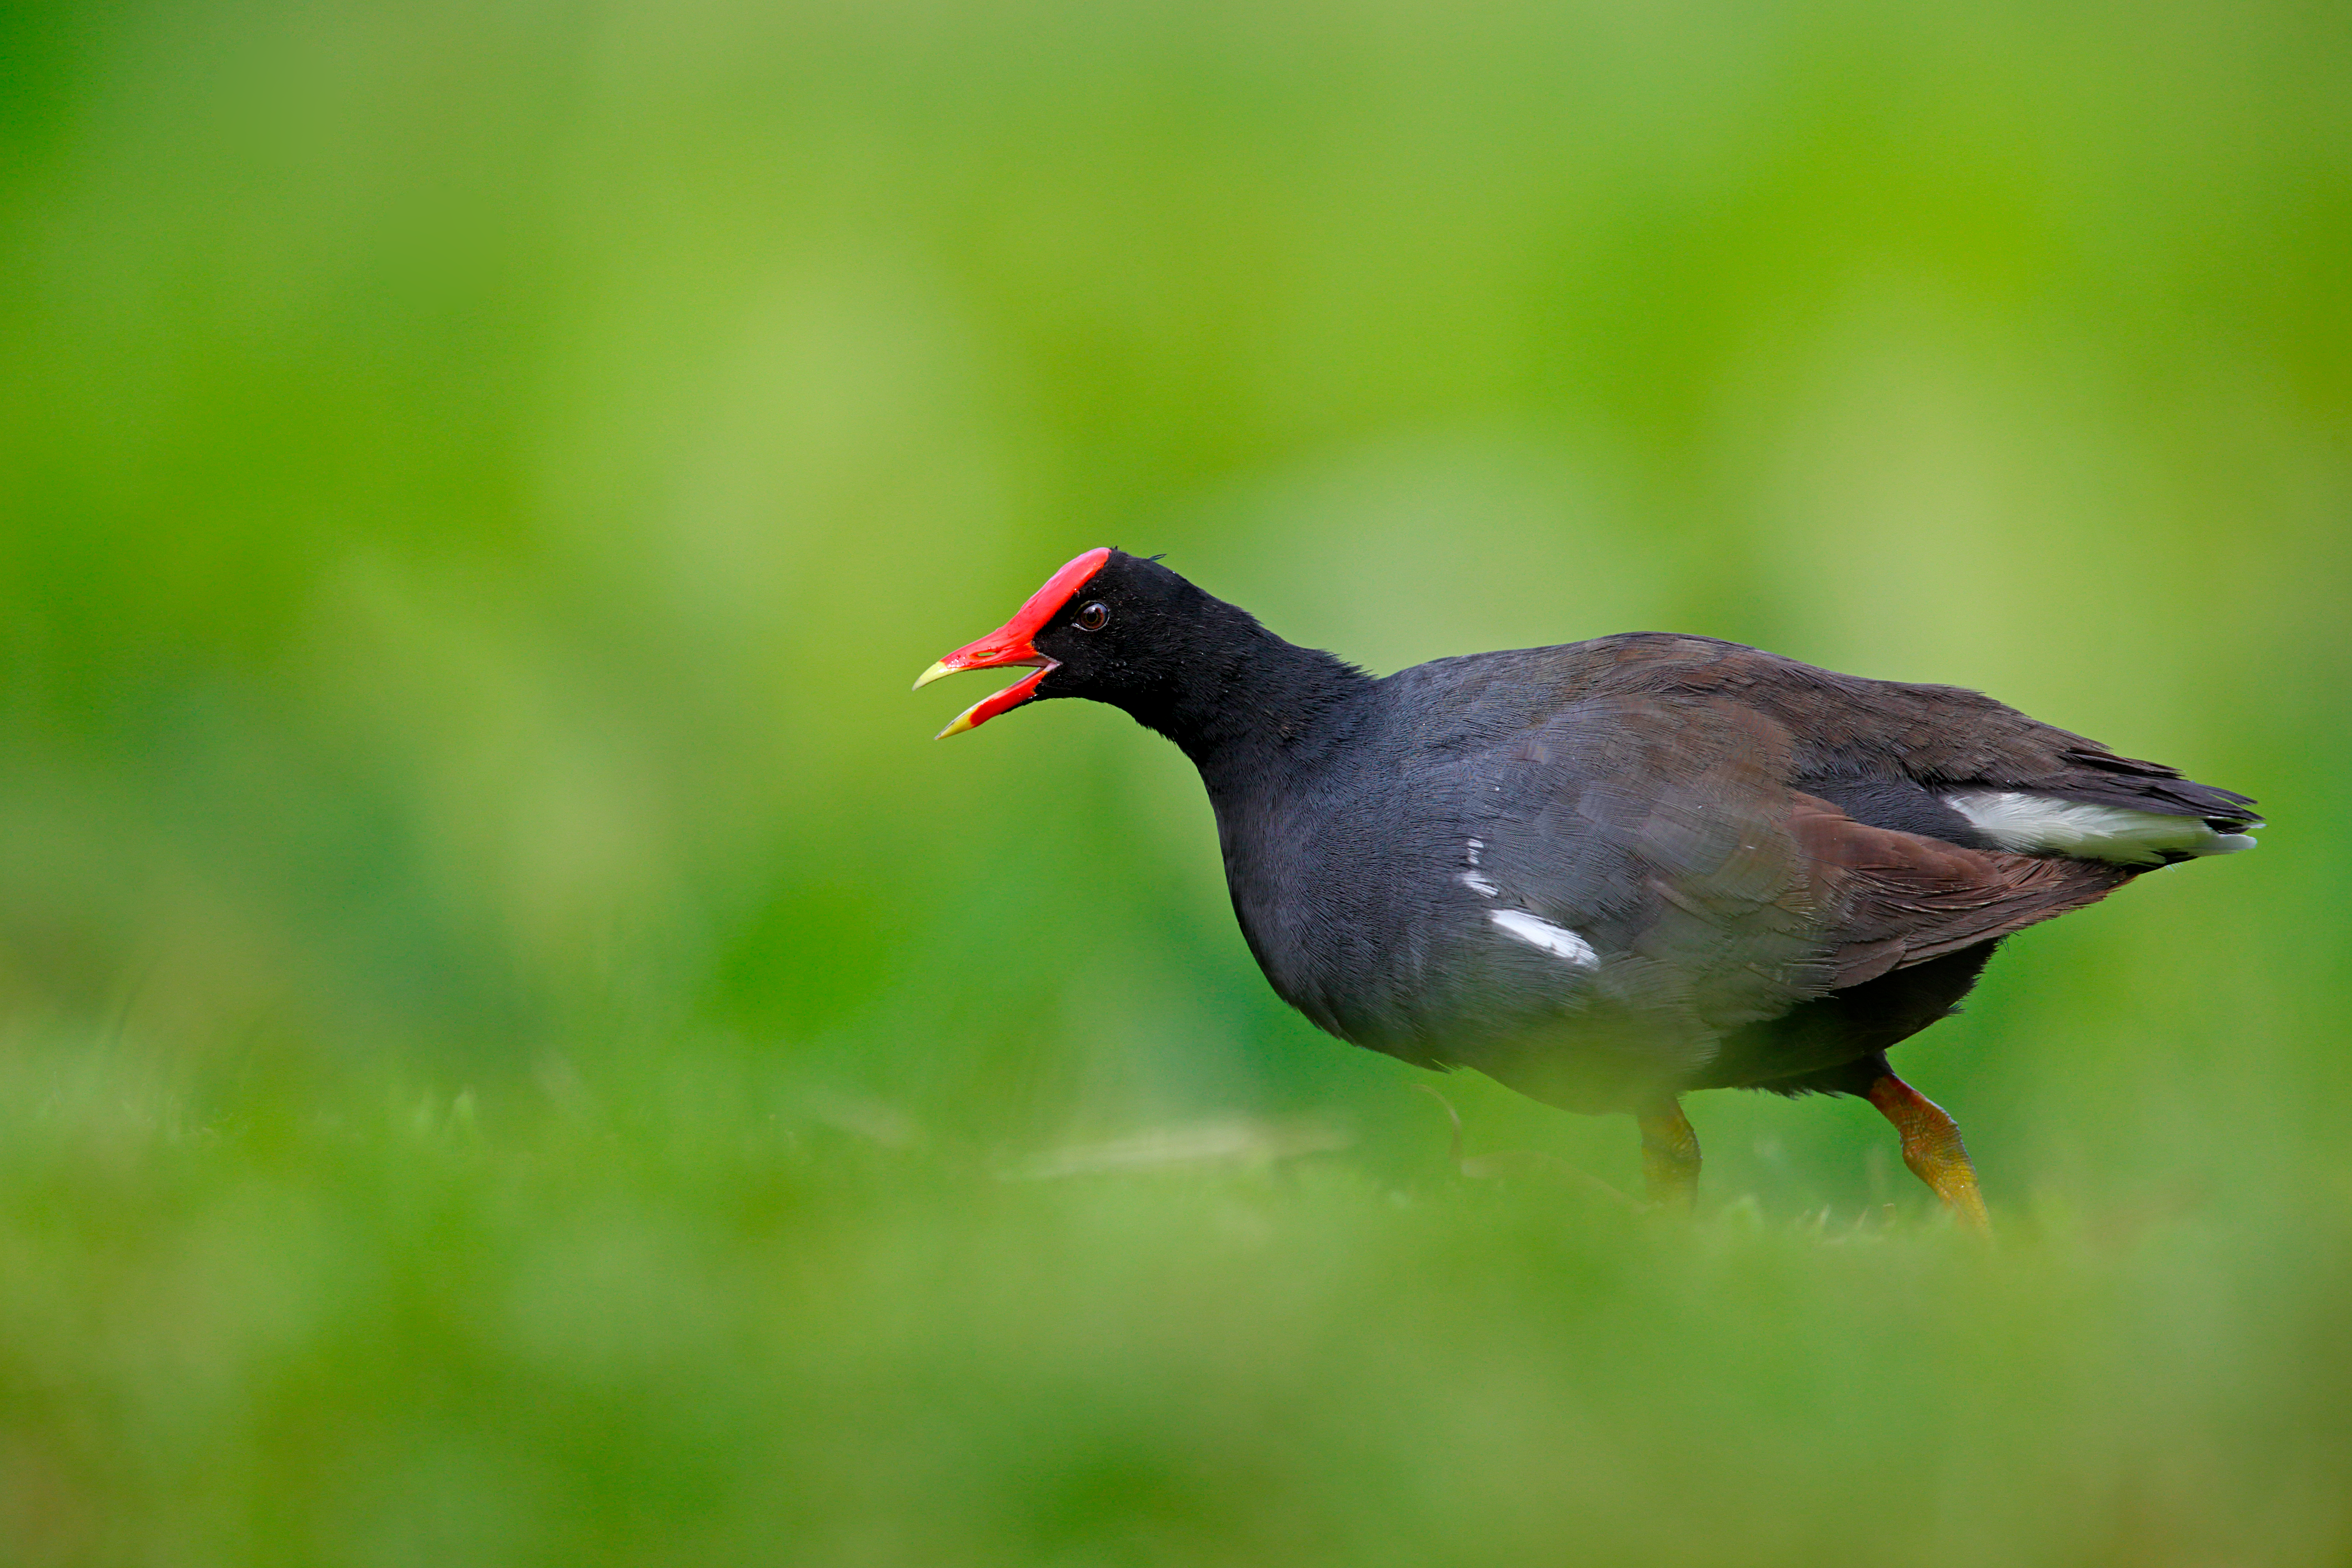 A black bird with a red skin patch on its forehead struts across lush green grass